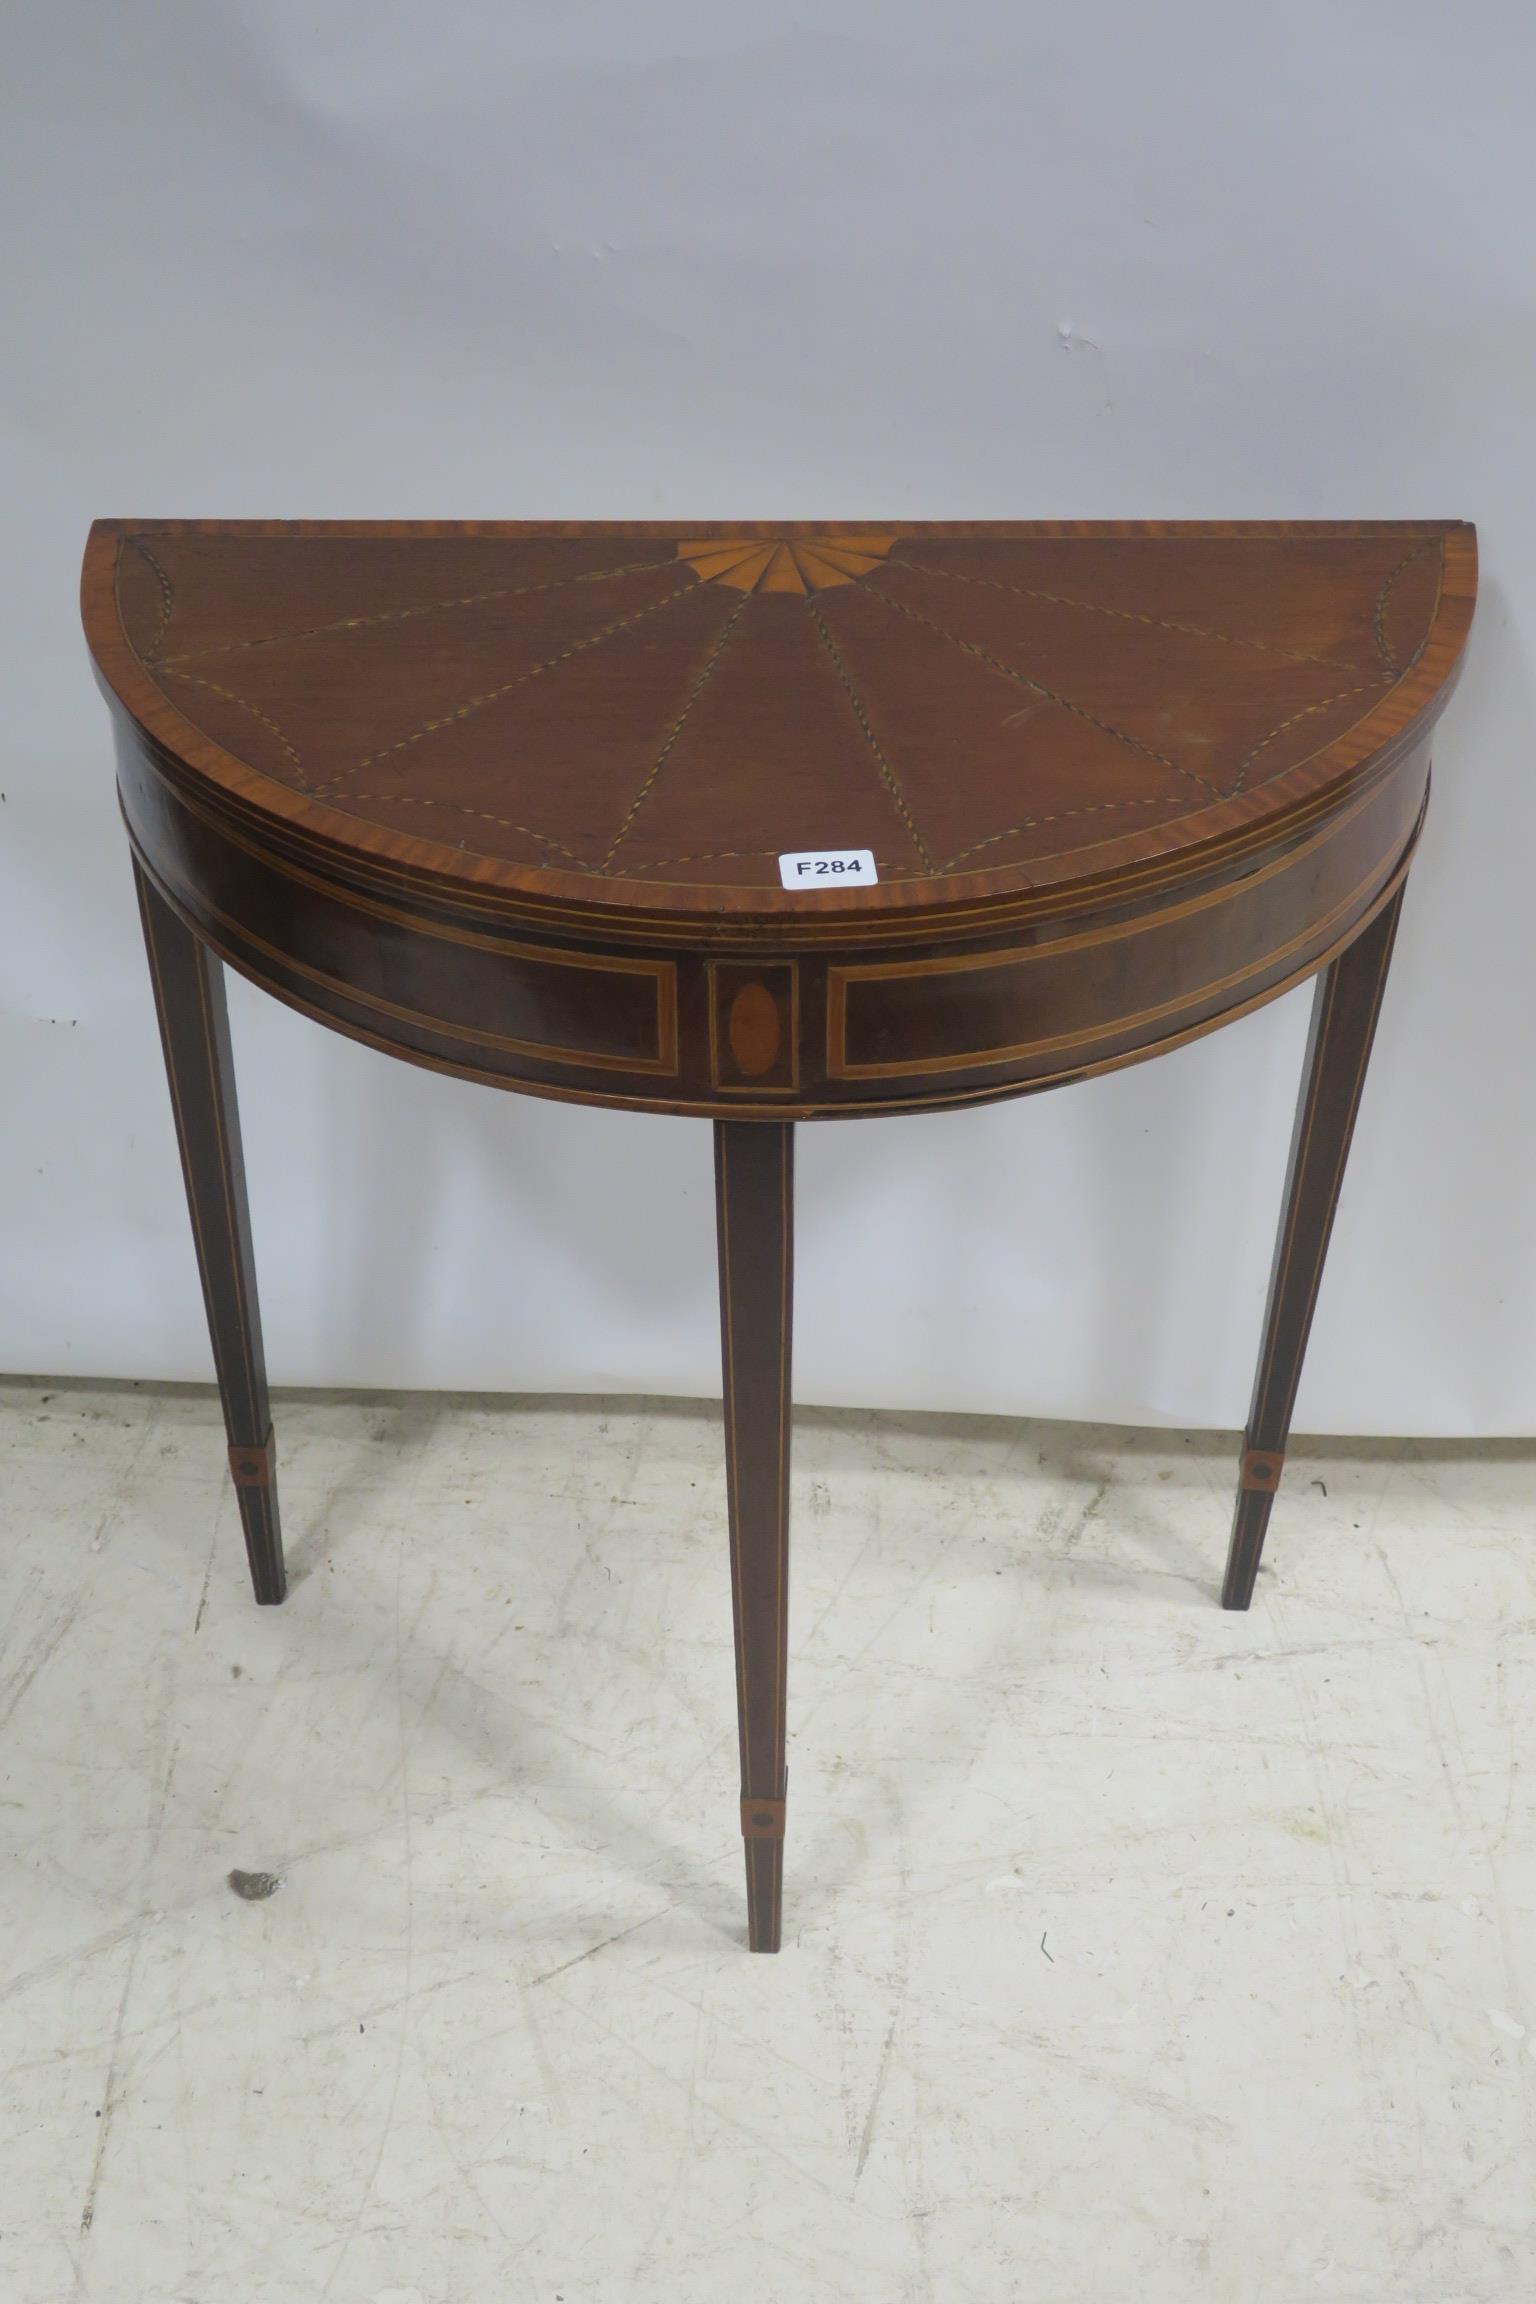 A FINE 19TH CENTURY MAHOGANY AND SATINWOOD CROSS BANDED SIDE TABLE of demi lune outline the shape